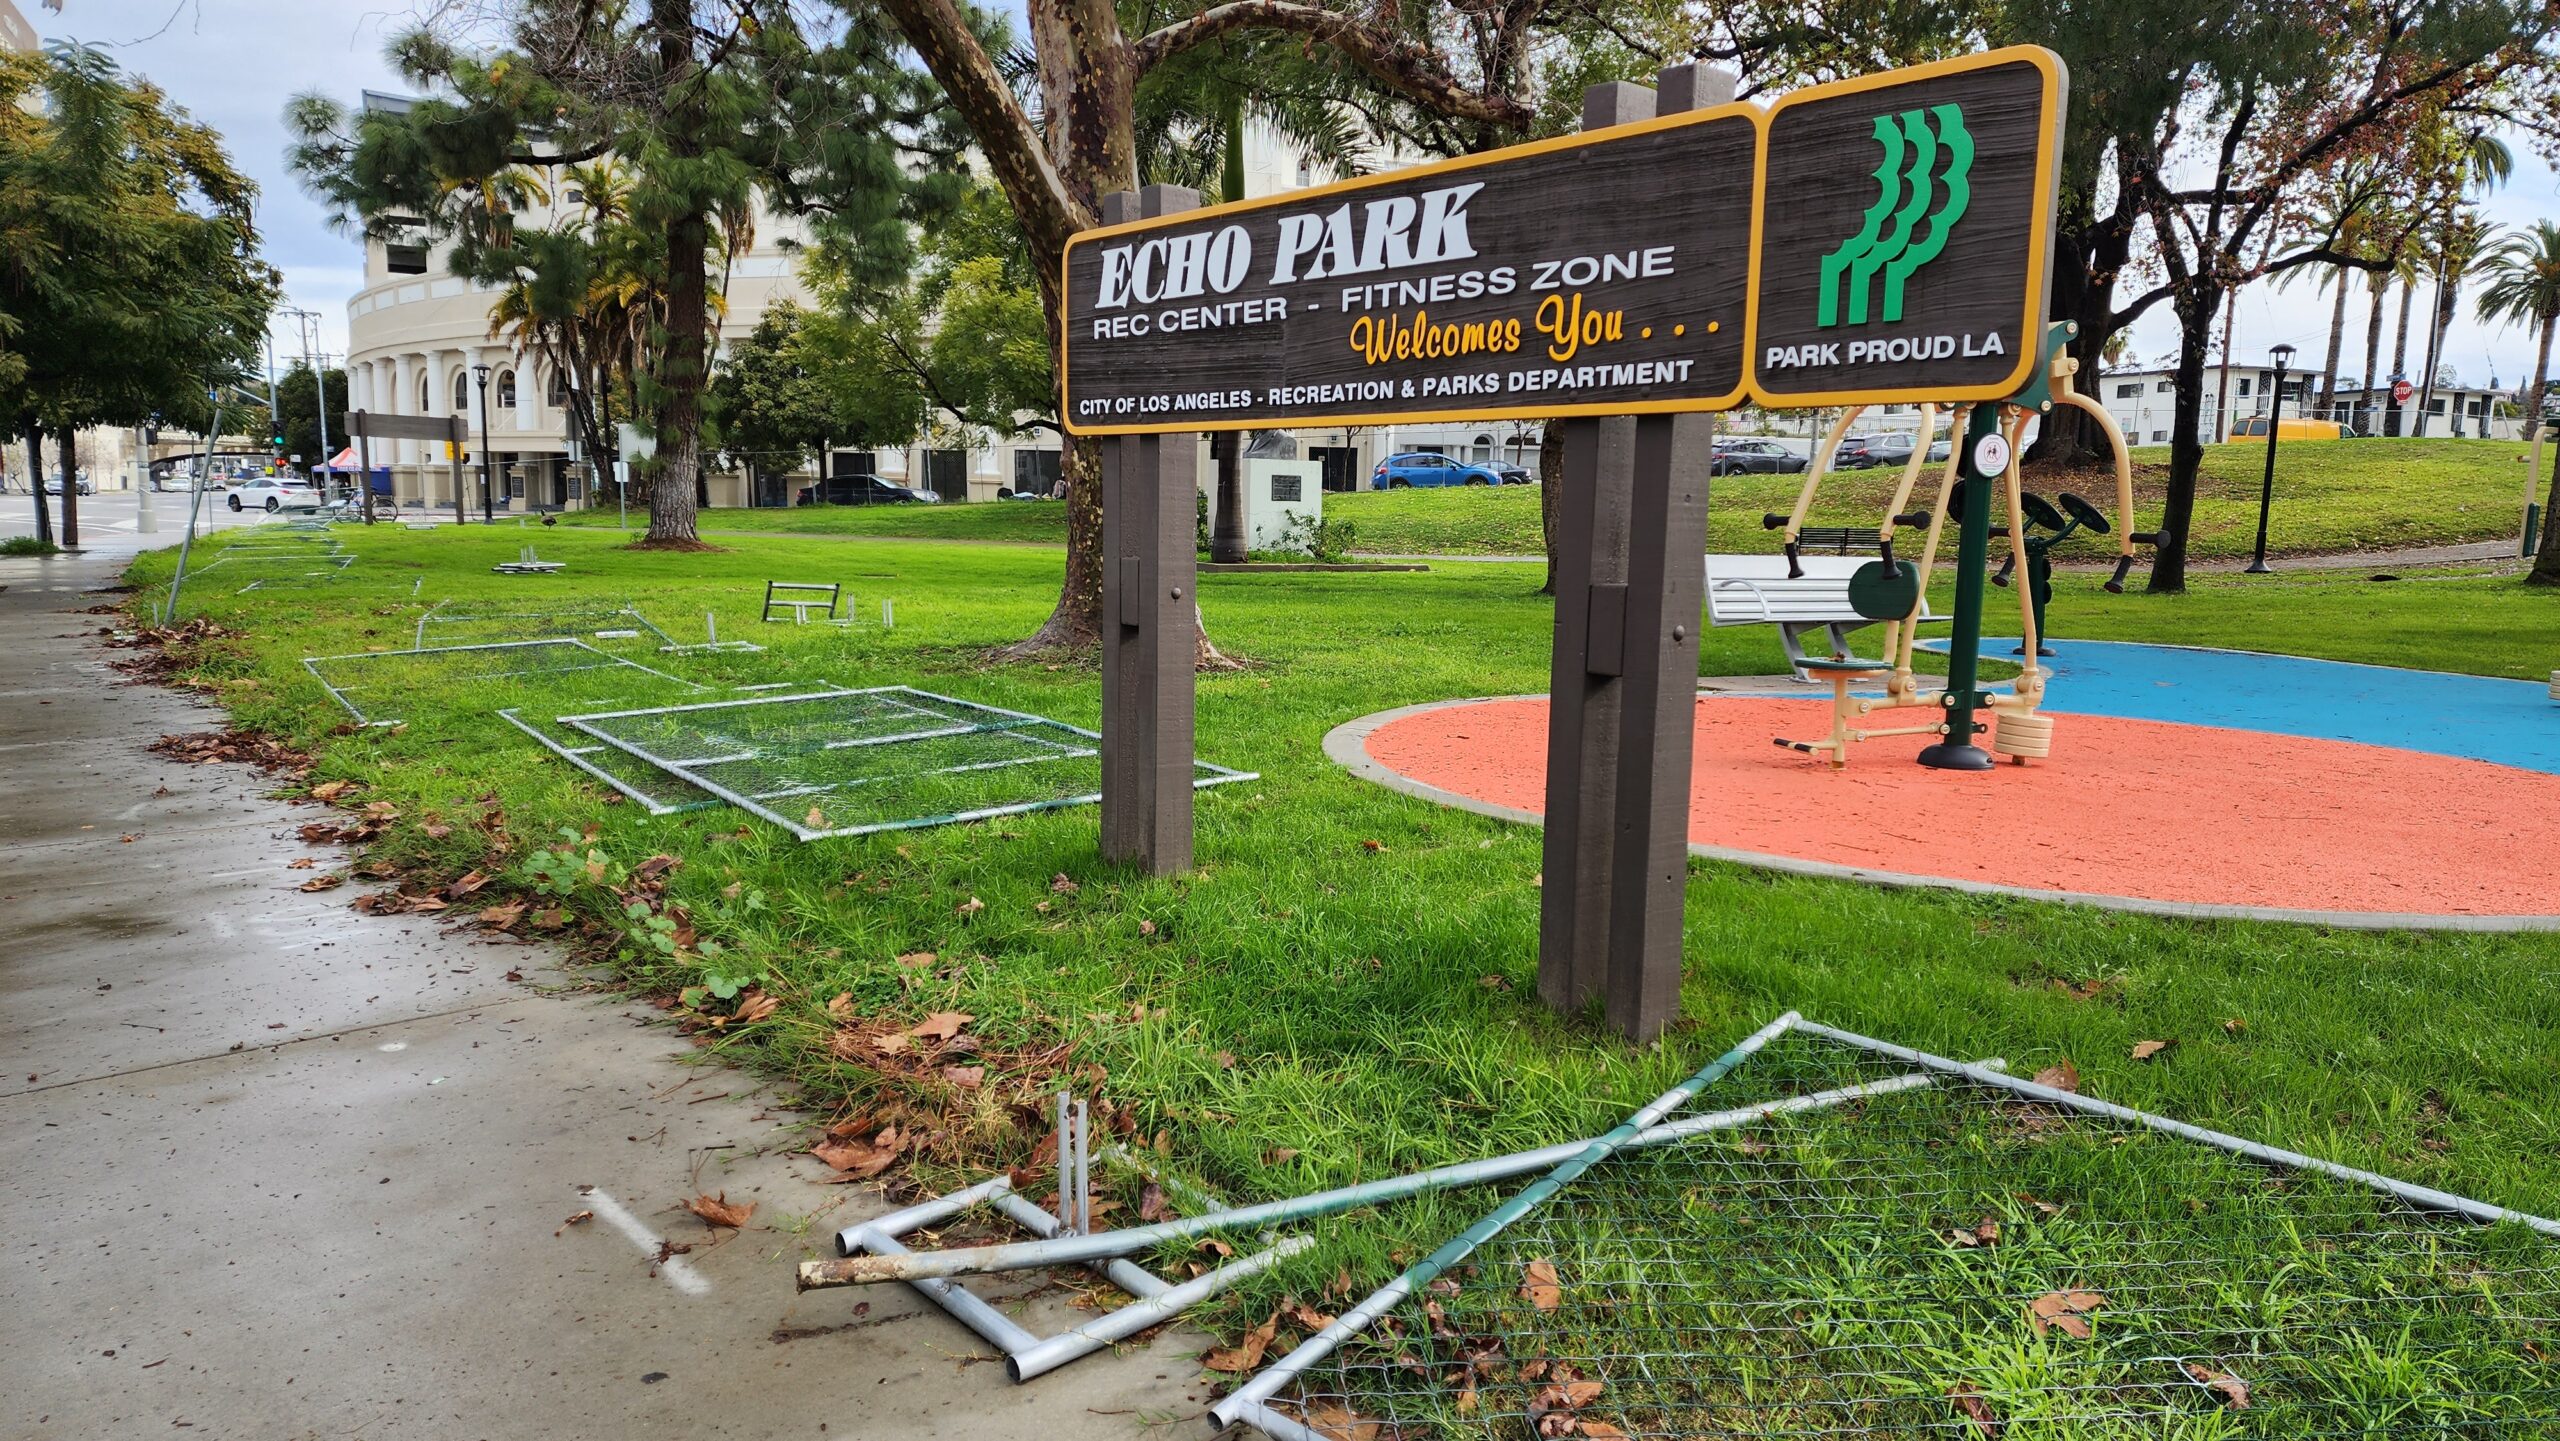 Fencing materials lay on the grass after in front of Echo Park Lake sign on the northwest side of the park.